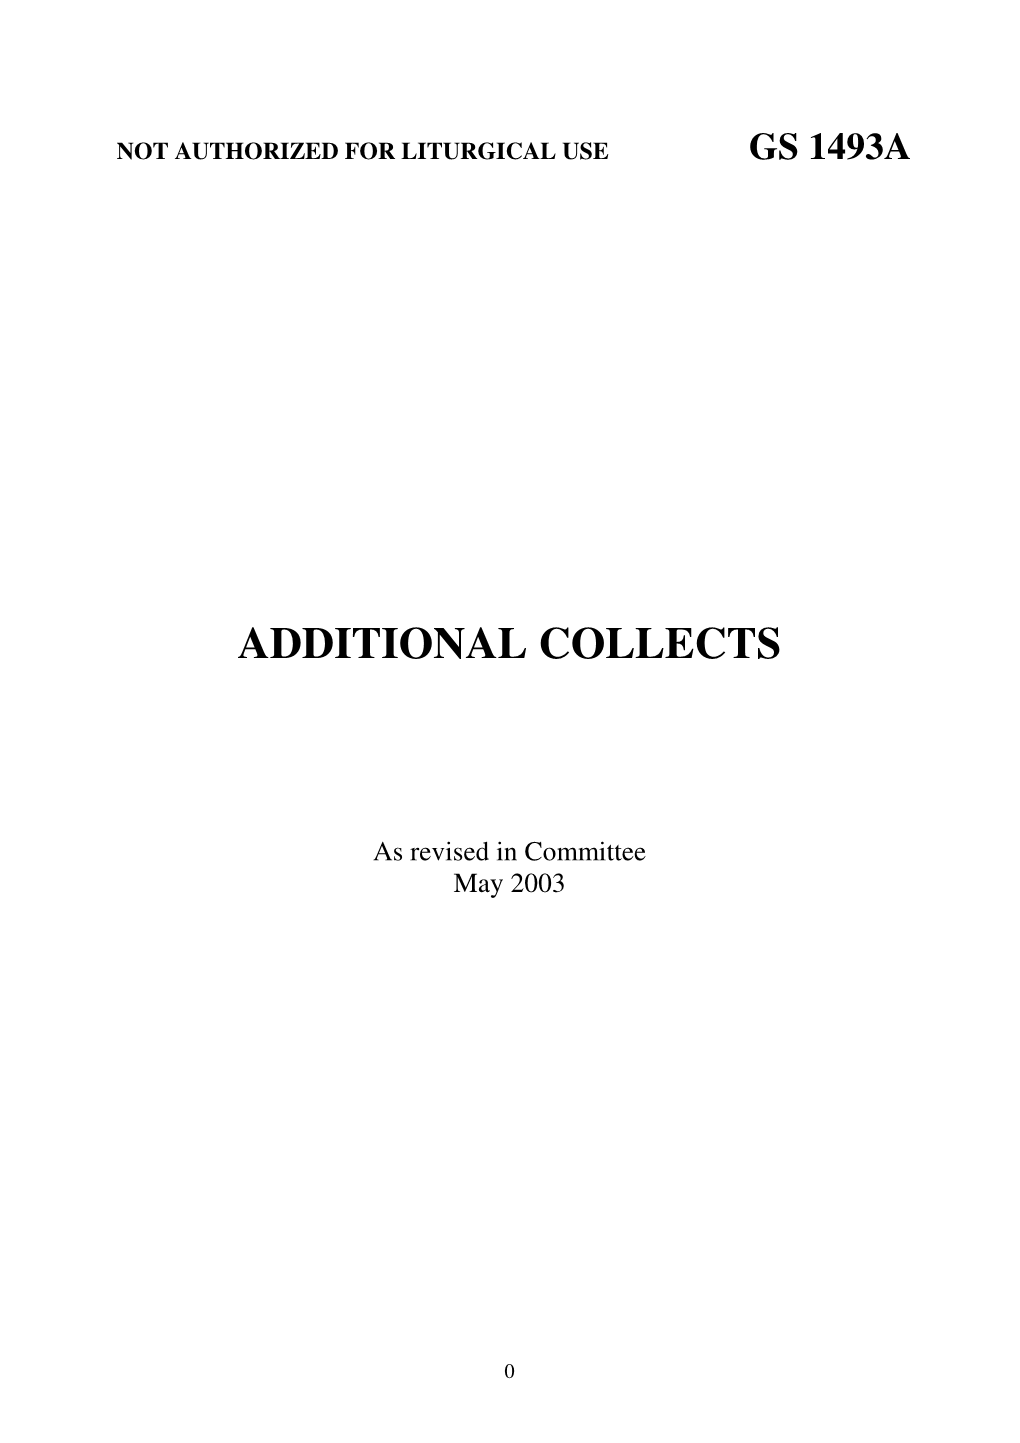 Additional Collects